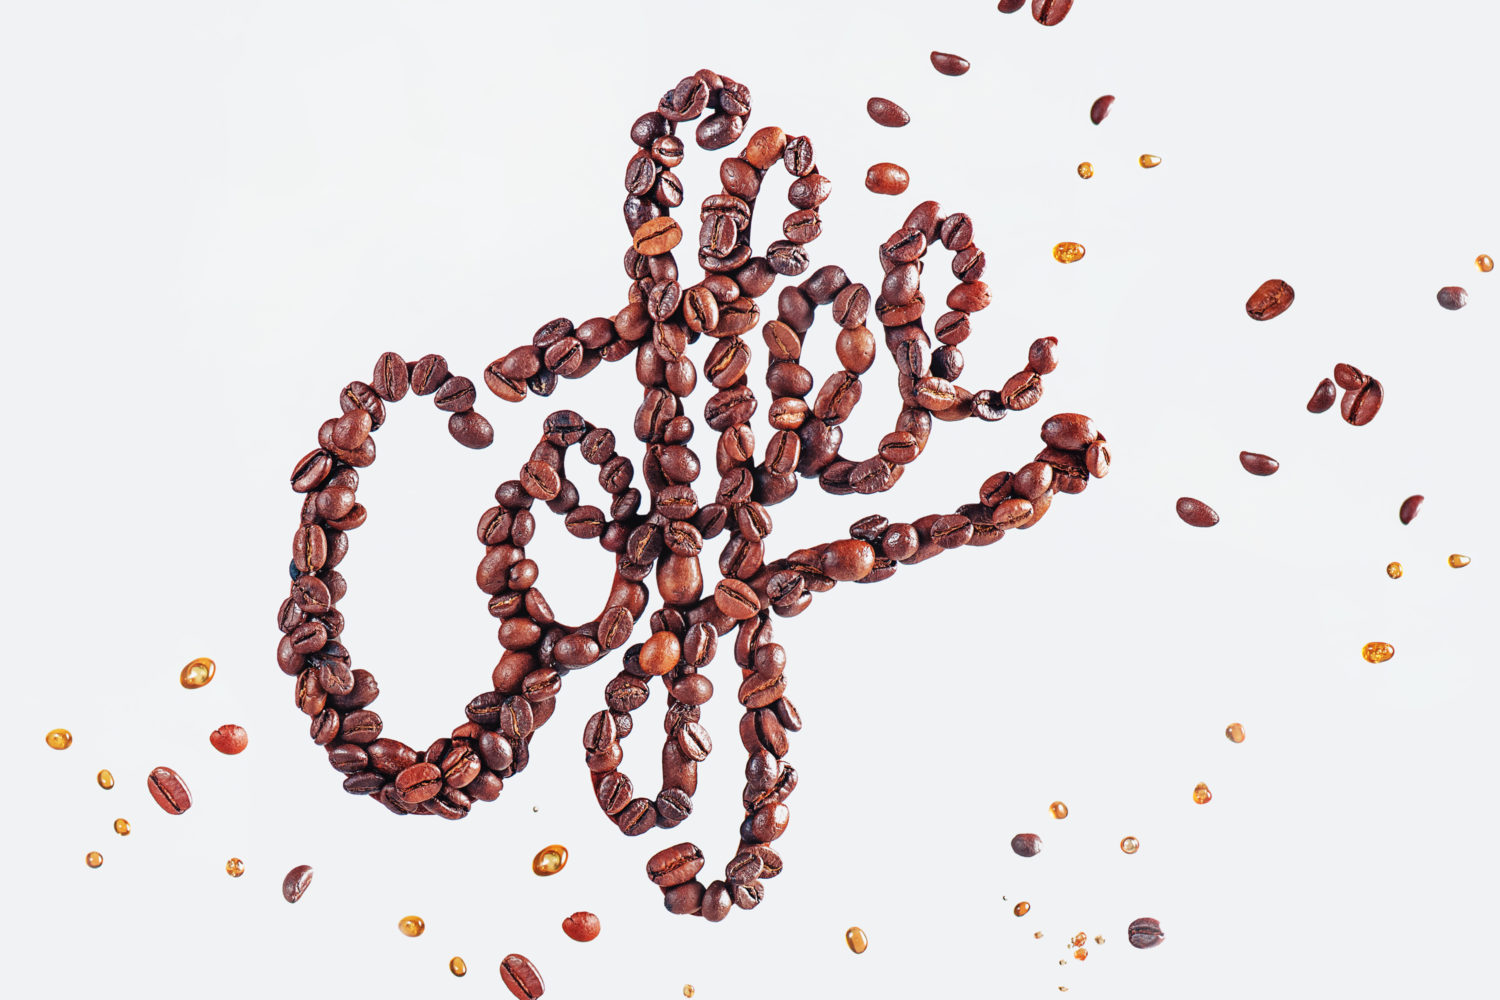 How to create a dynamic coffee-themed still life